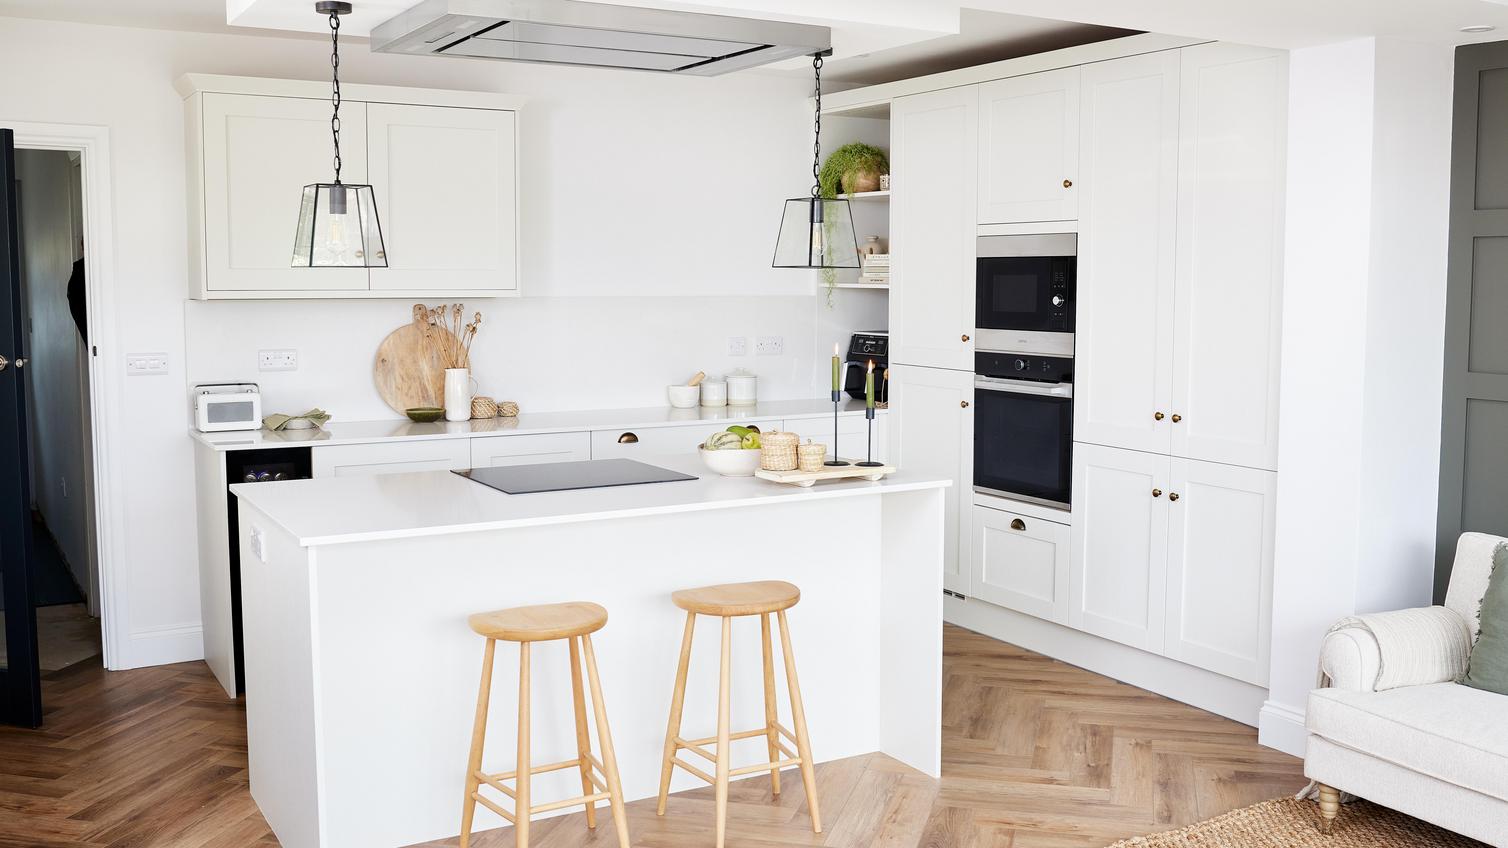 A white Halesworth kitchen from Howdens, in a island layout and with light wooden furniture and accessories